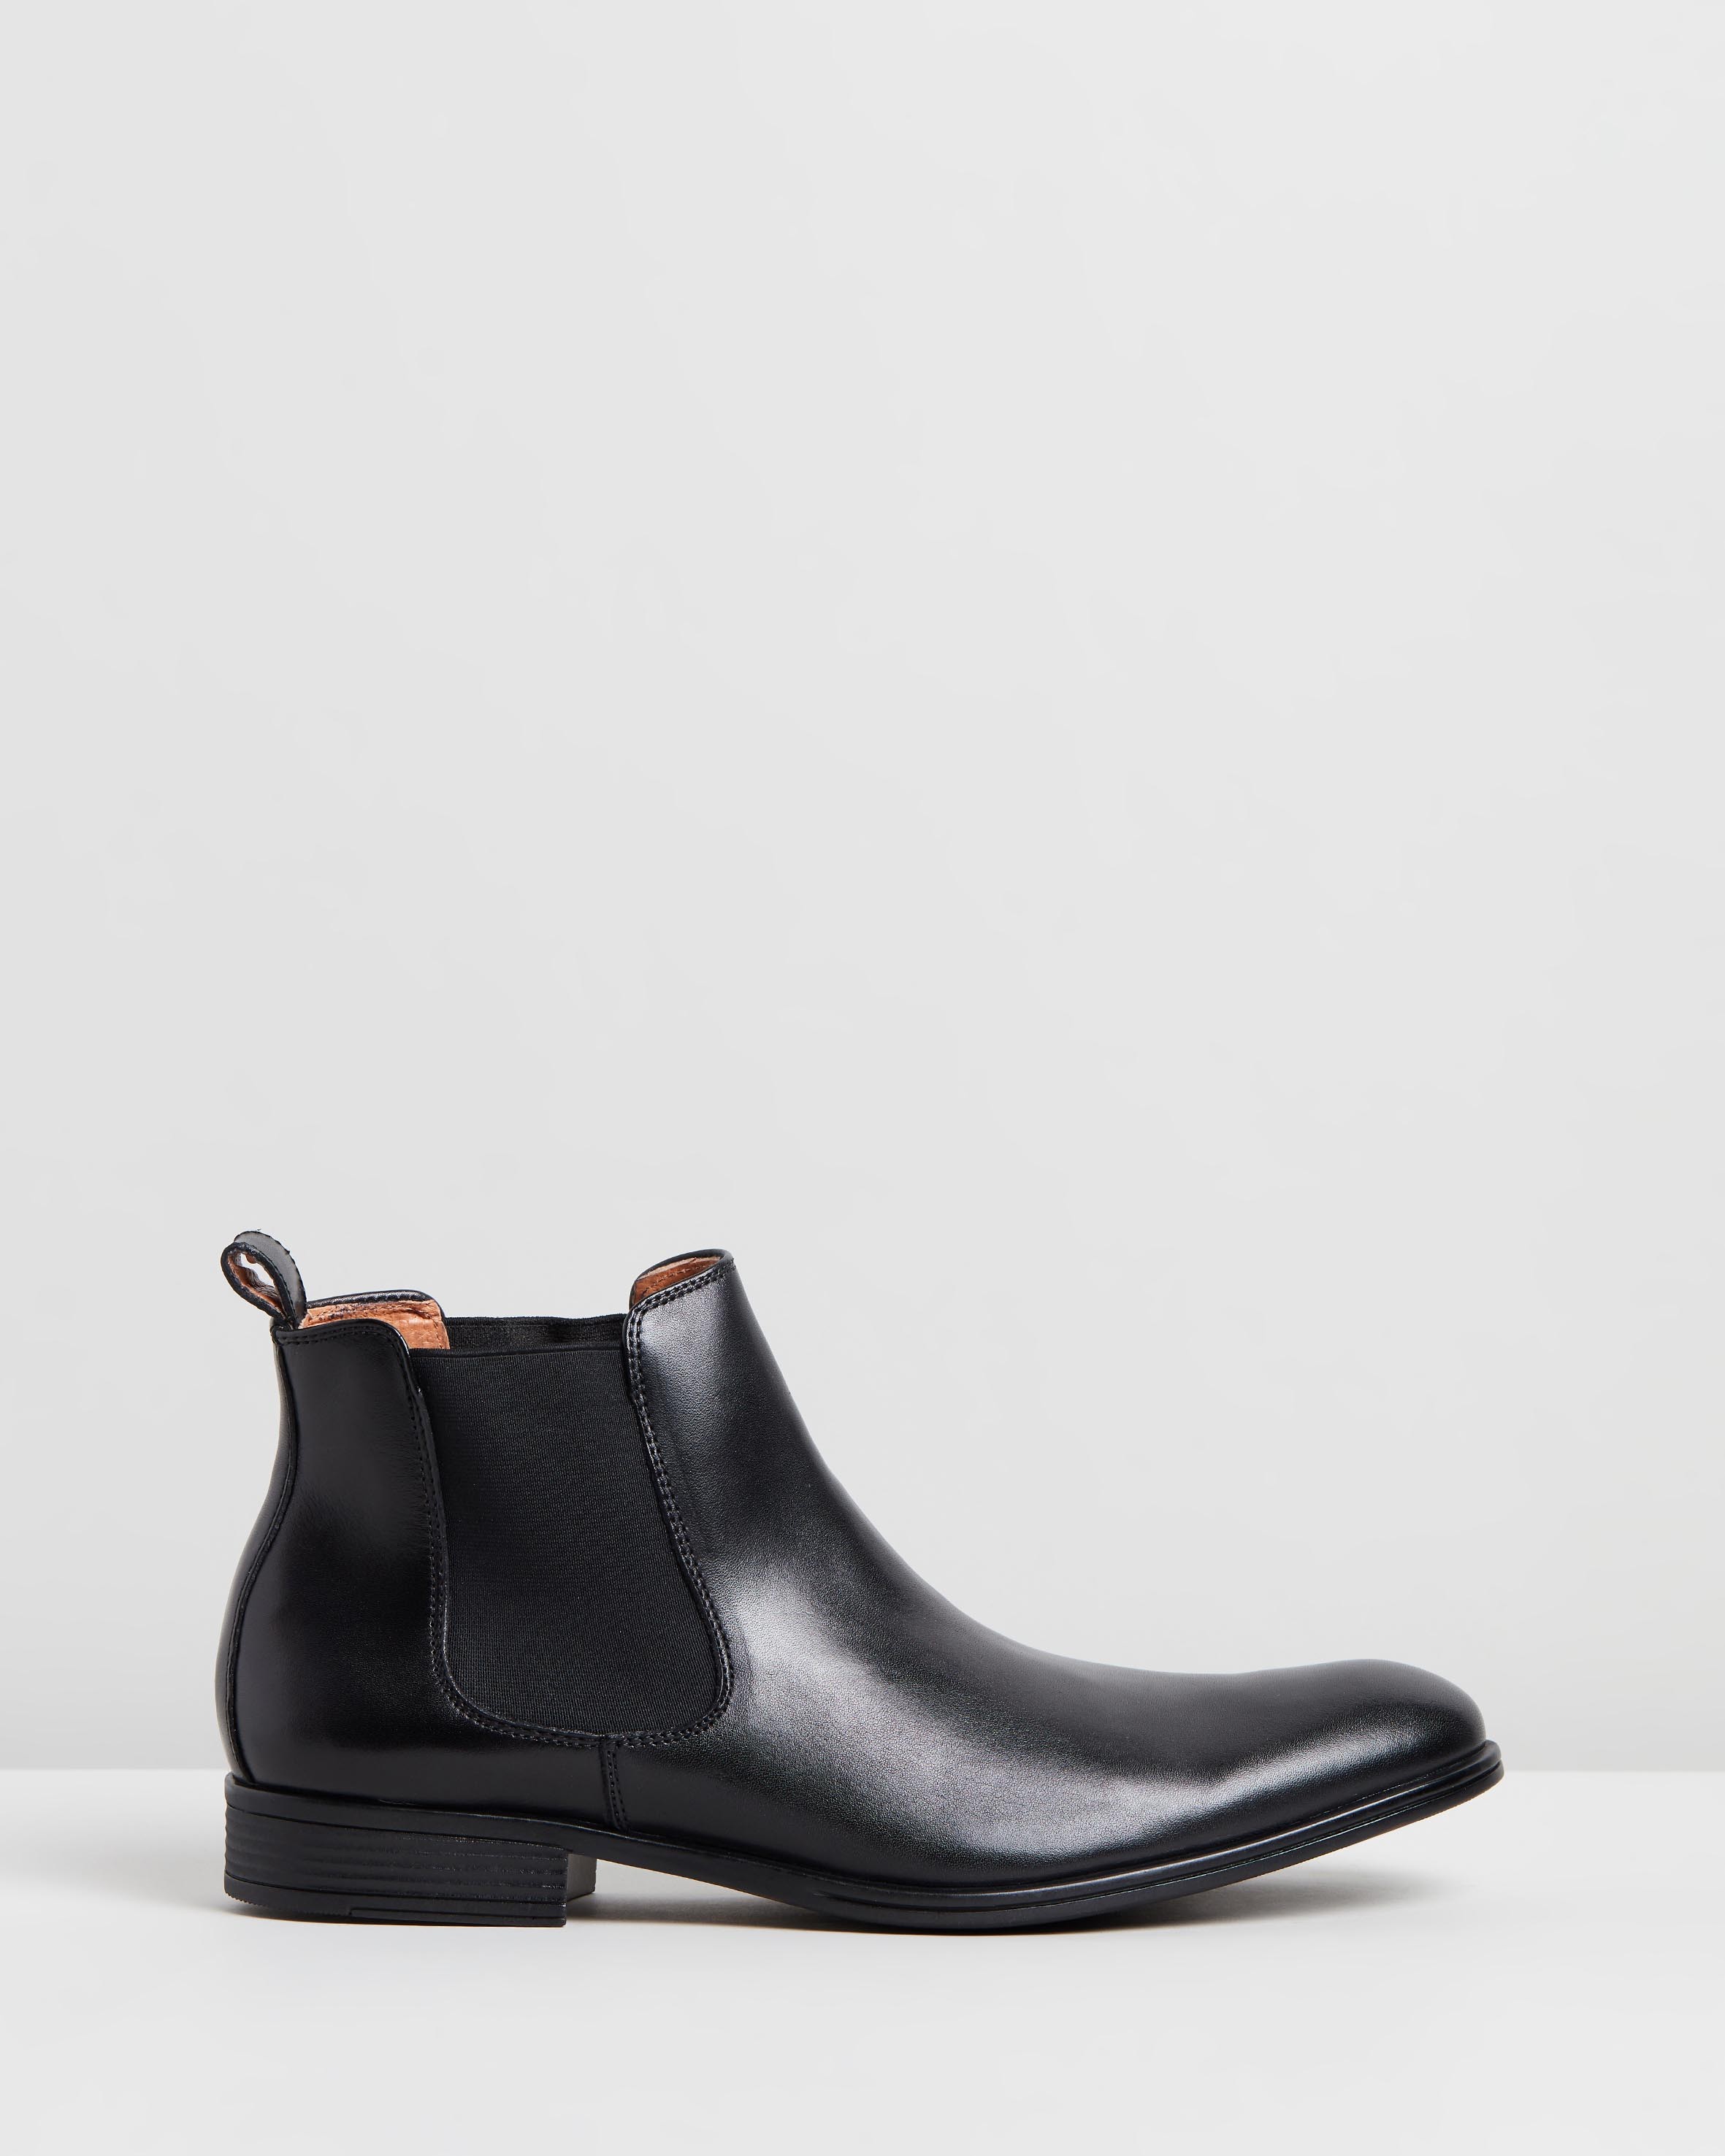 Pace Performance Chelsea Boots Black by Jeff Banks | ShoeSales